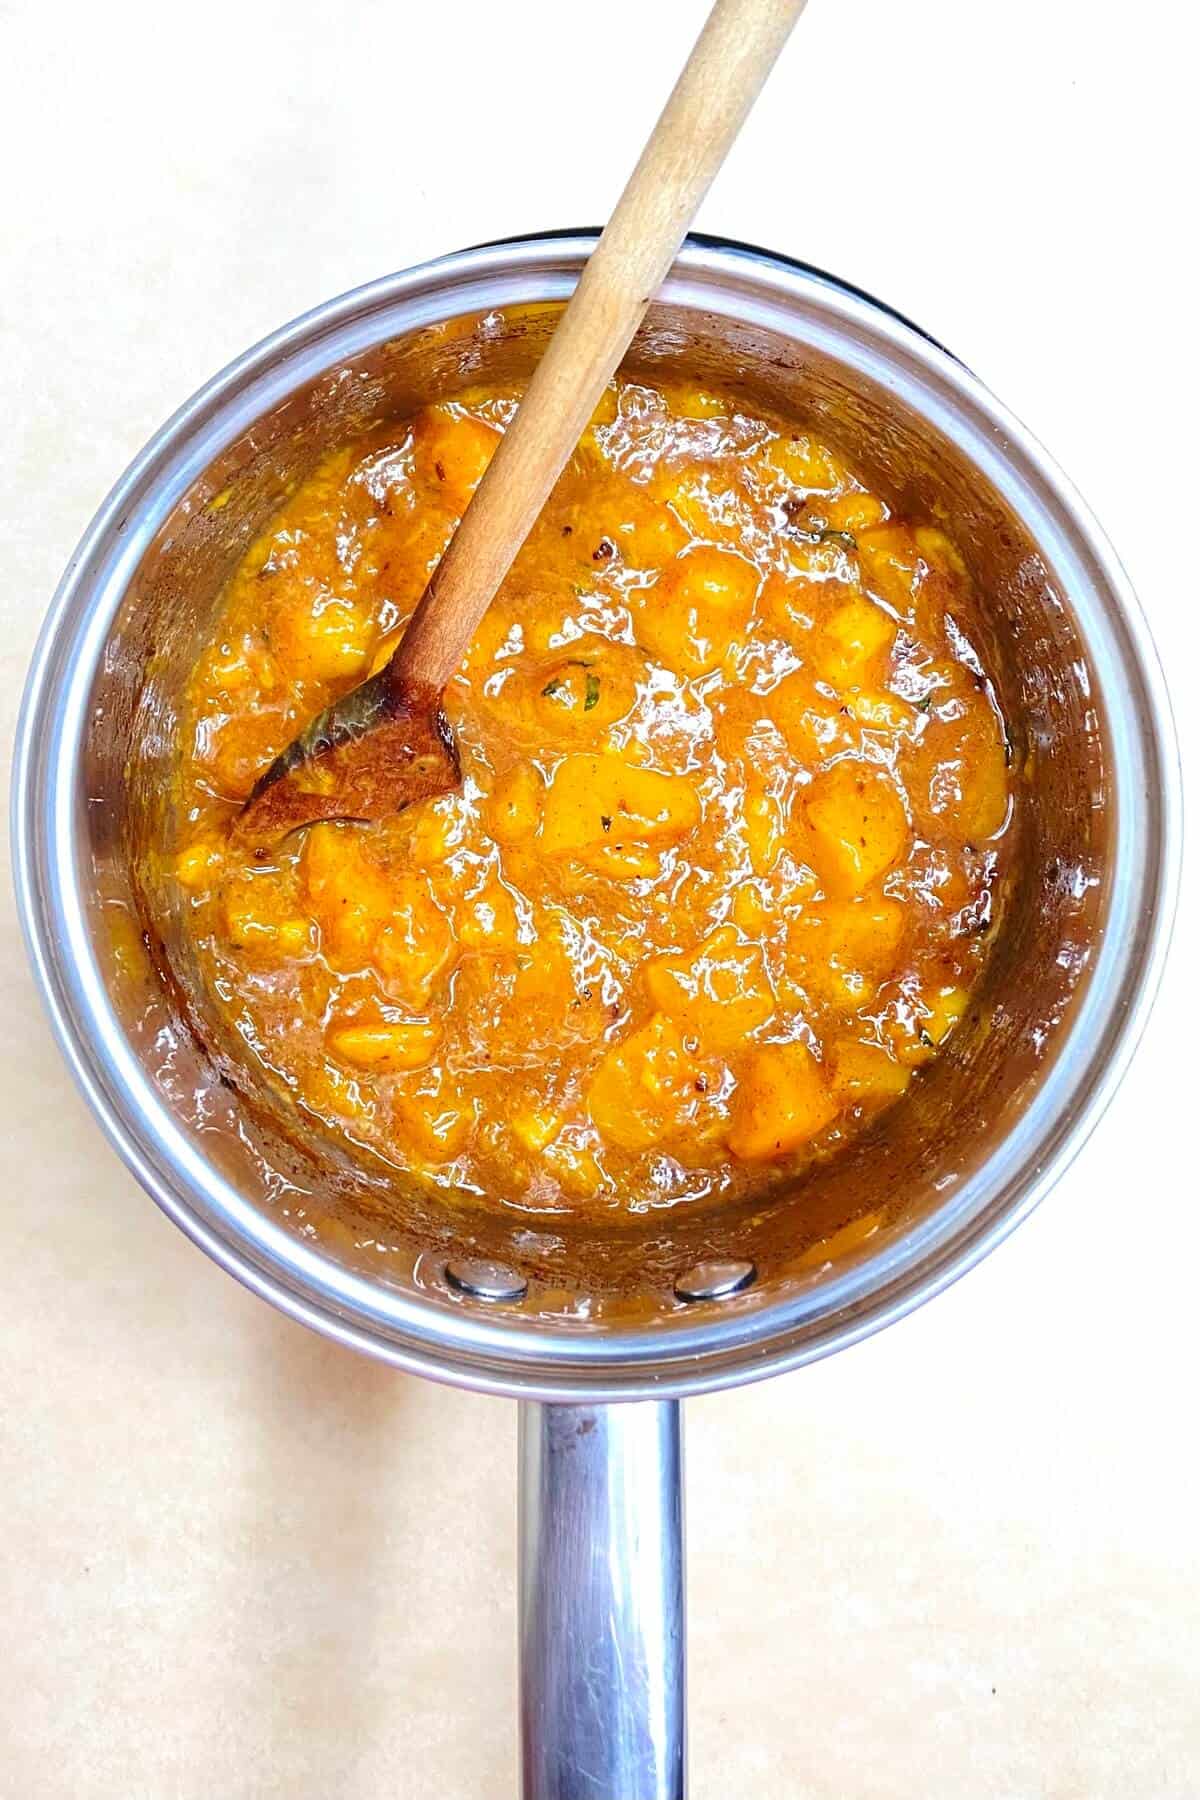 Cooking the peach and mango filling in a pot with a wooden spoon.